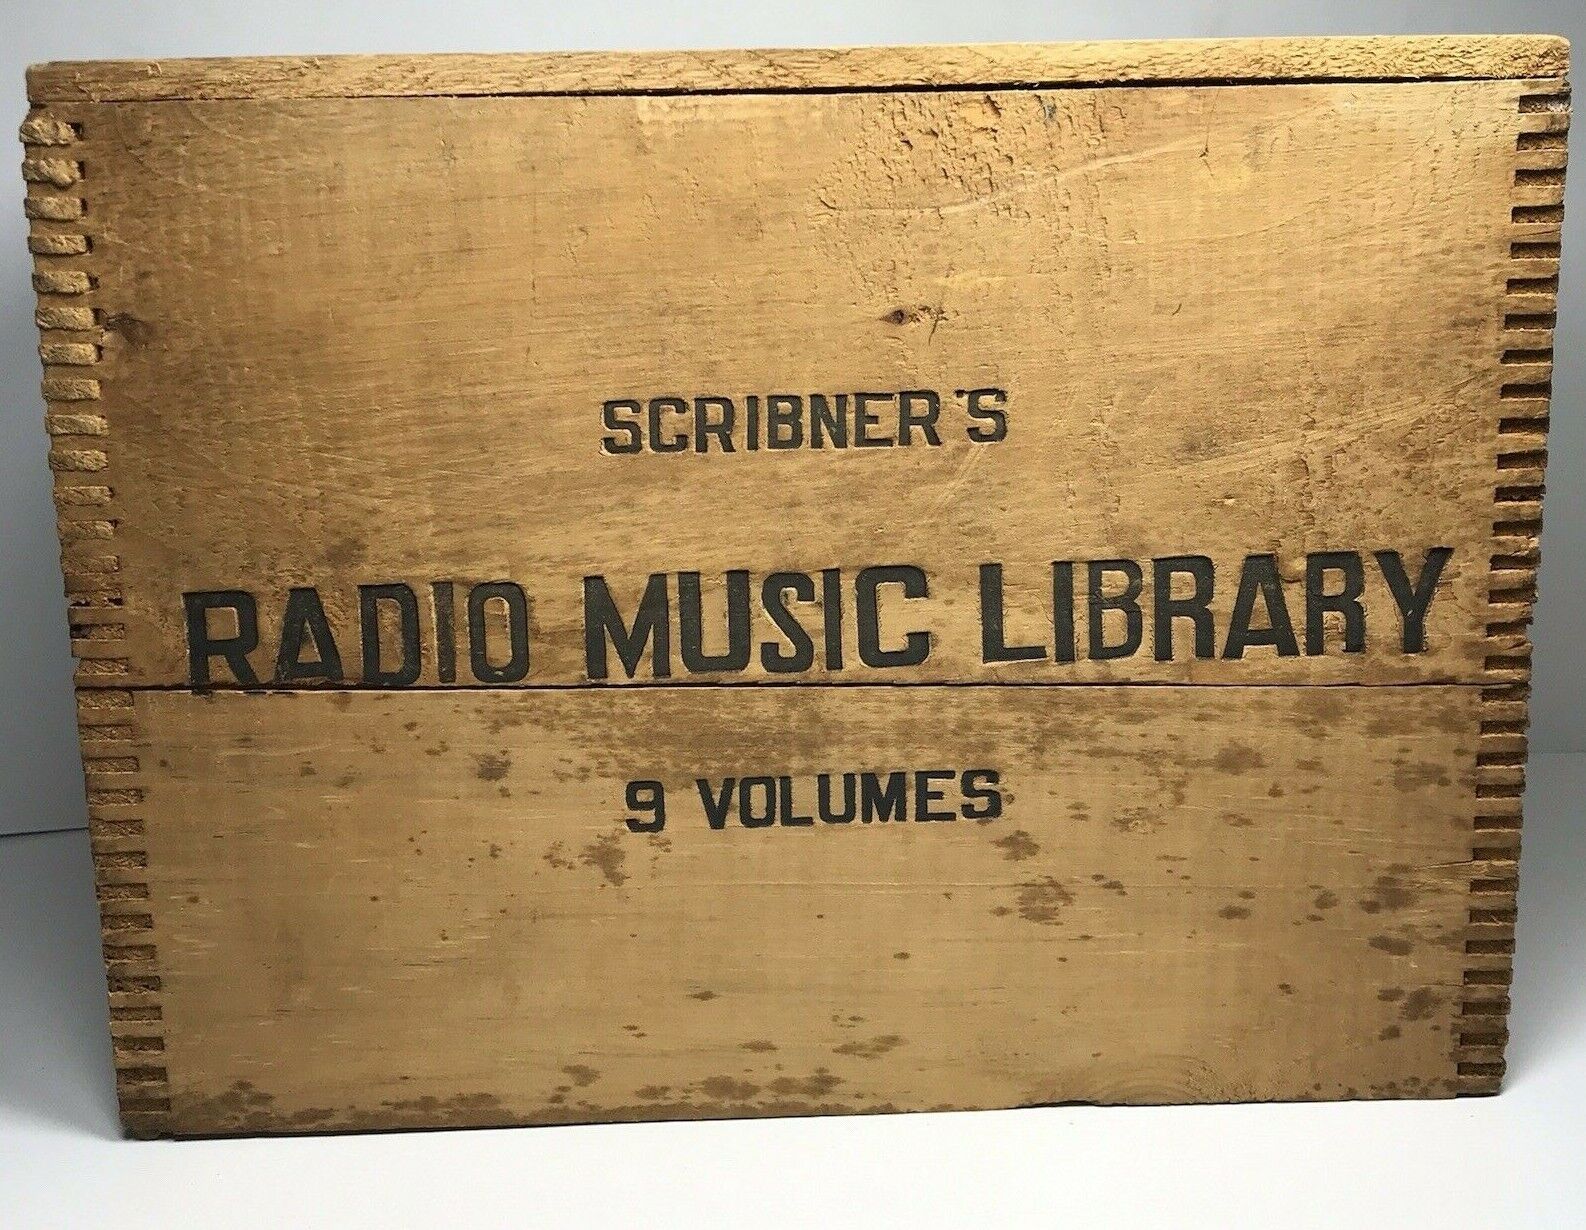 Scribner's Radio Music Library 9 Volumes Wooden Shipping Crate Box W/ Postage